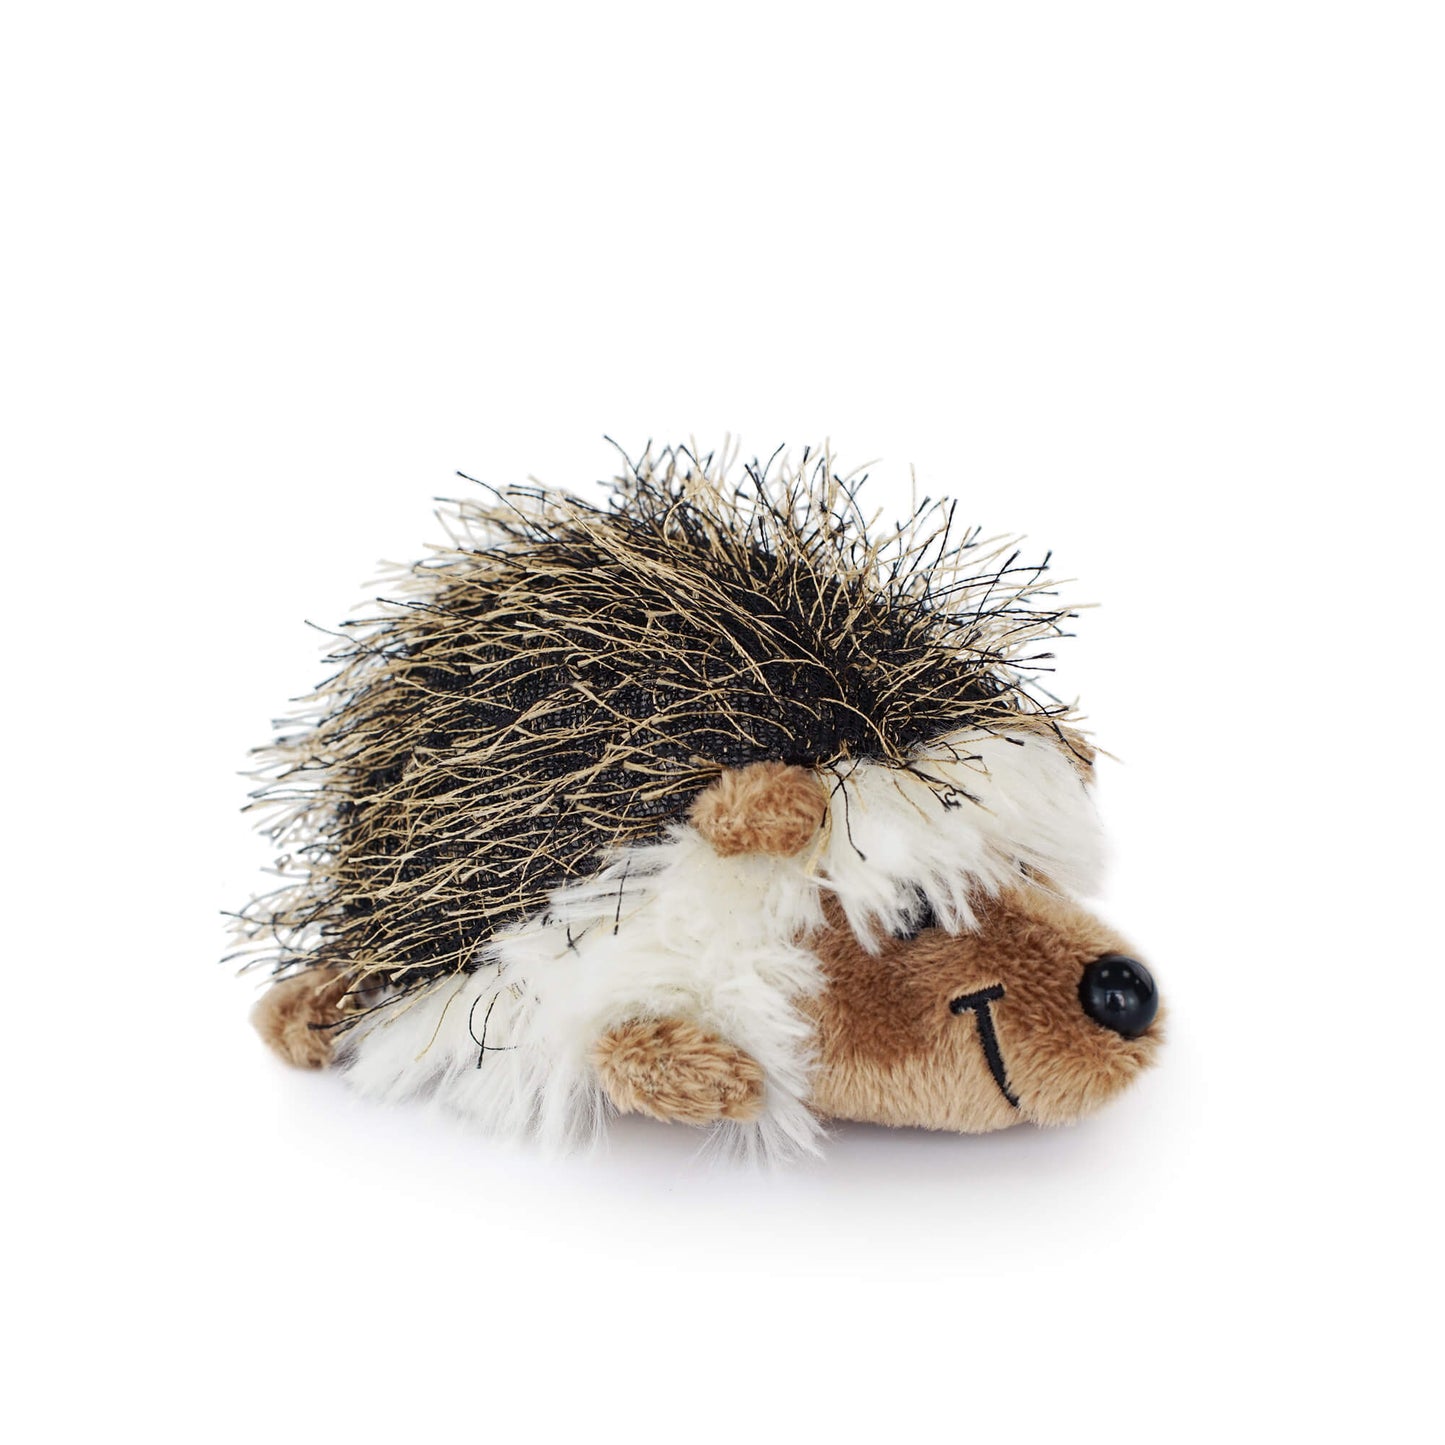 What small hedgehog is like PlushThis